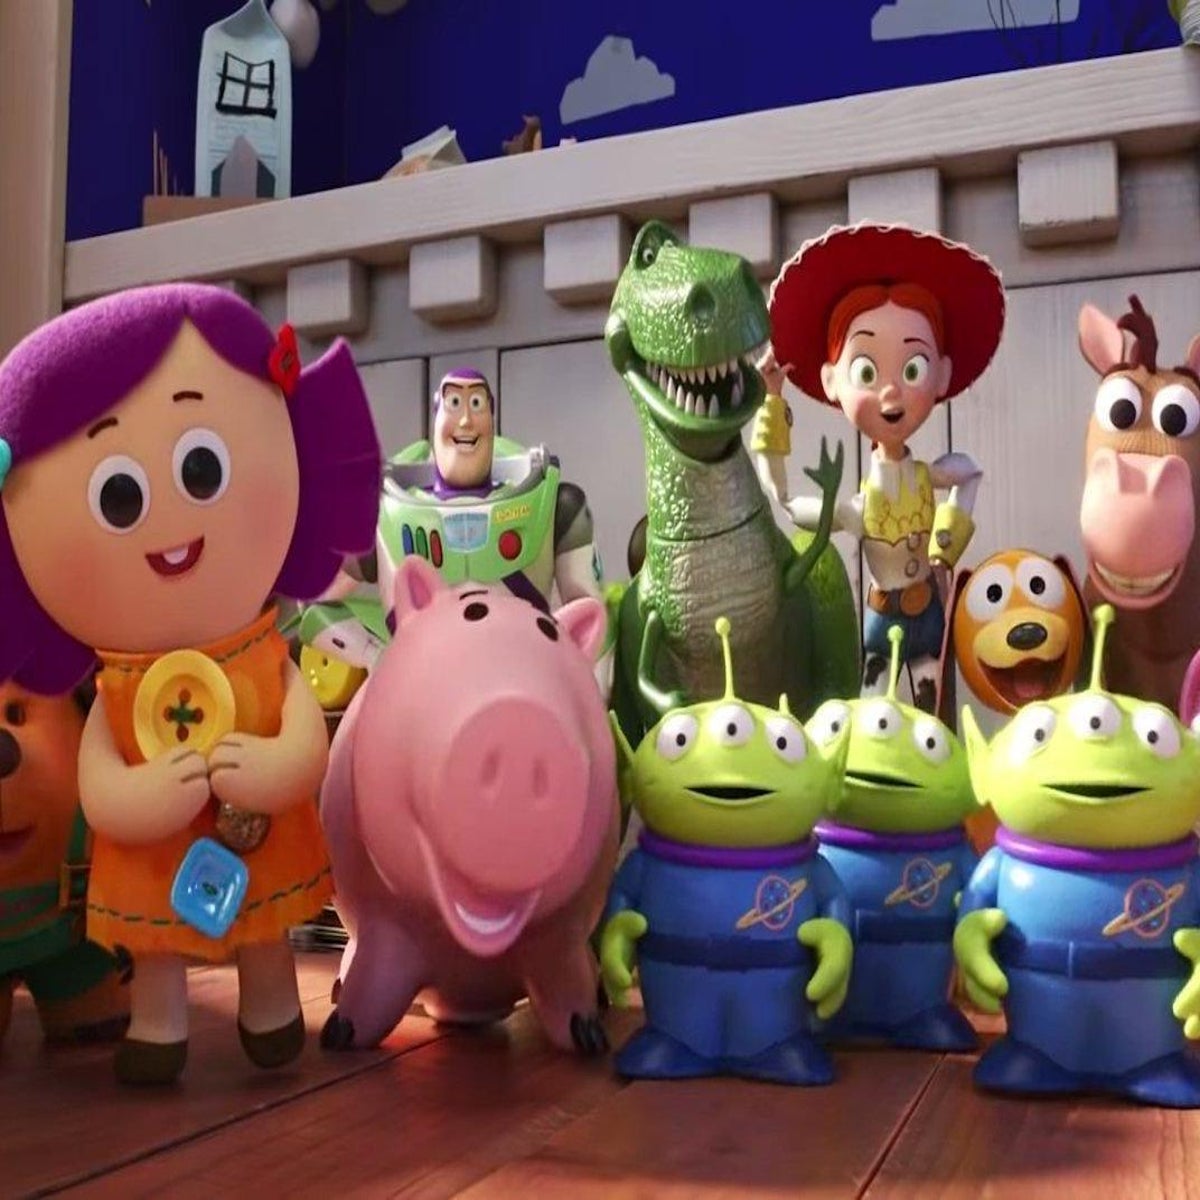 Toy Story 4' trailer has every parent crying about toy attachments